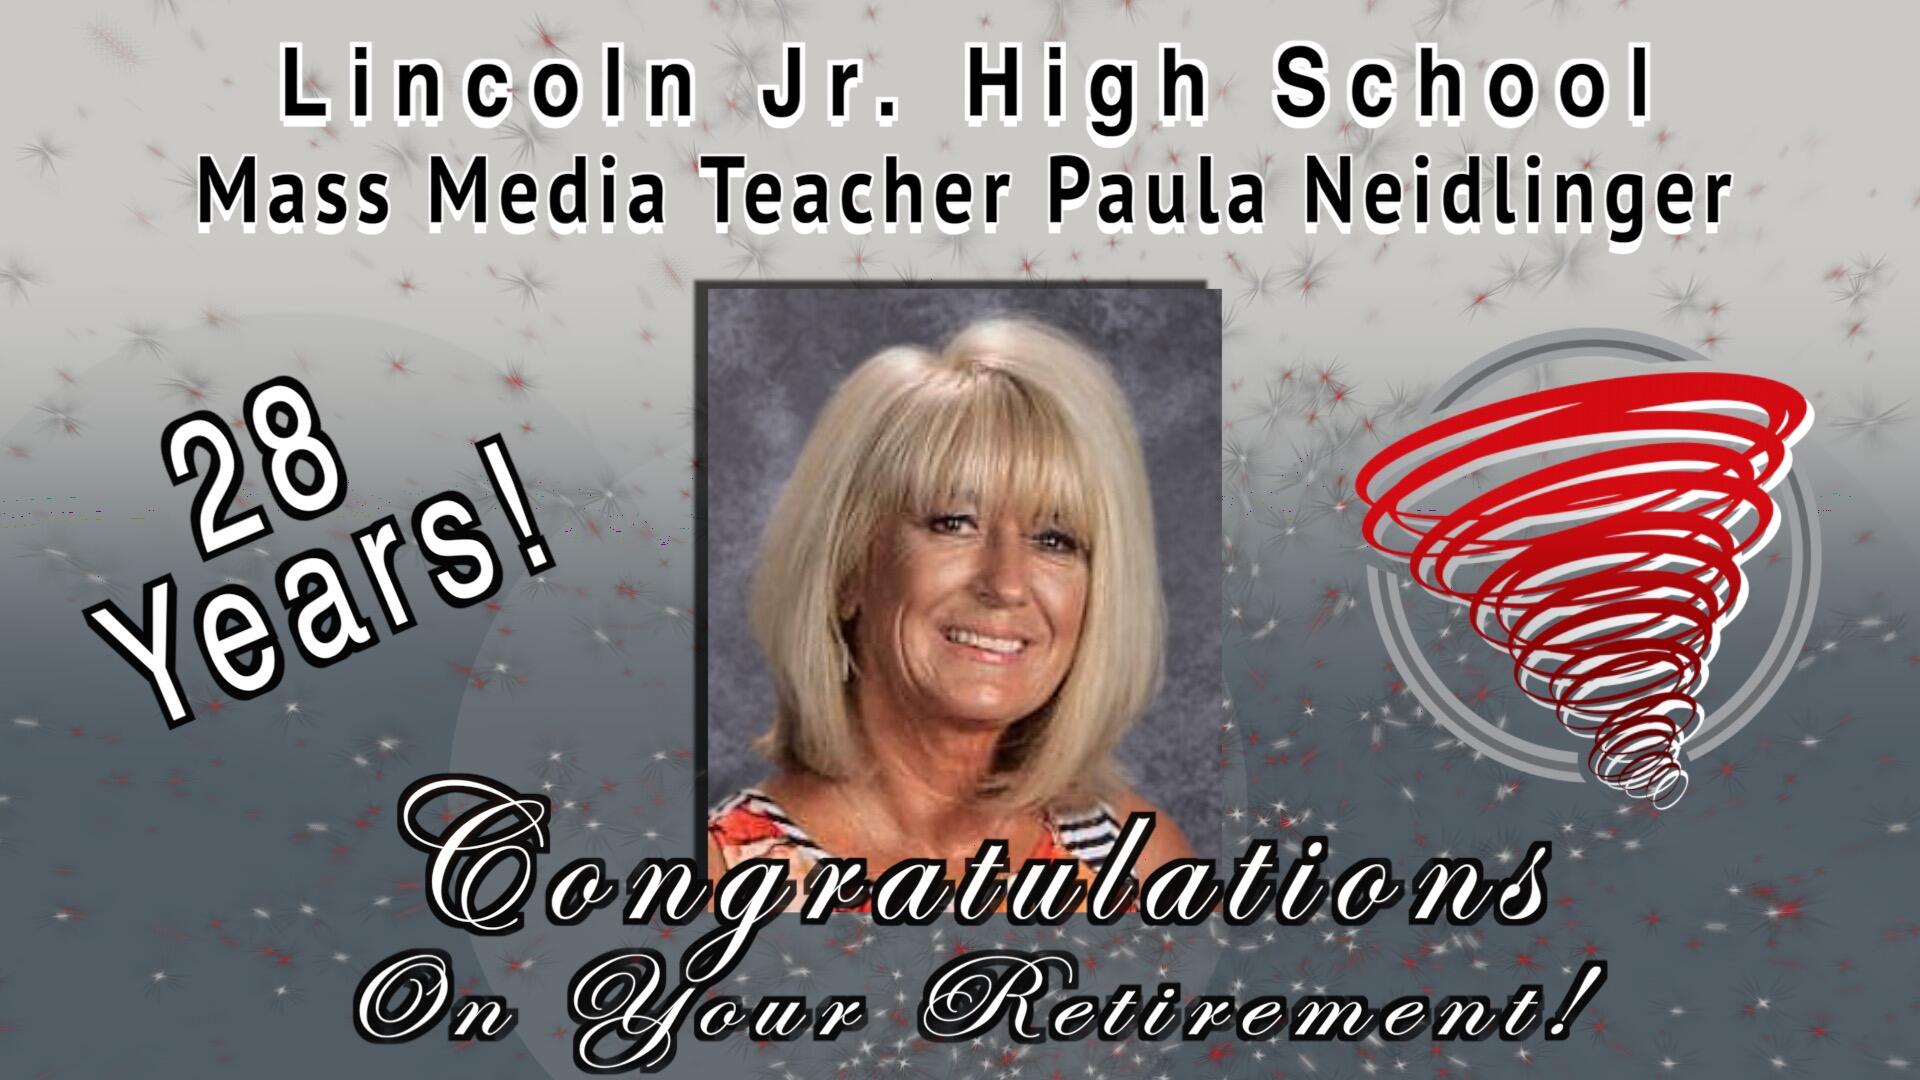 Lincoln Junior High School Mass Media Teacher Paula Neidlinger with photo 28 Years! Congratulations On Your Retirement!  and Red Storm Logo